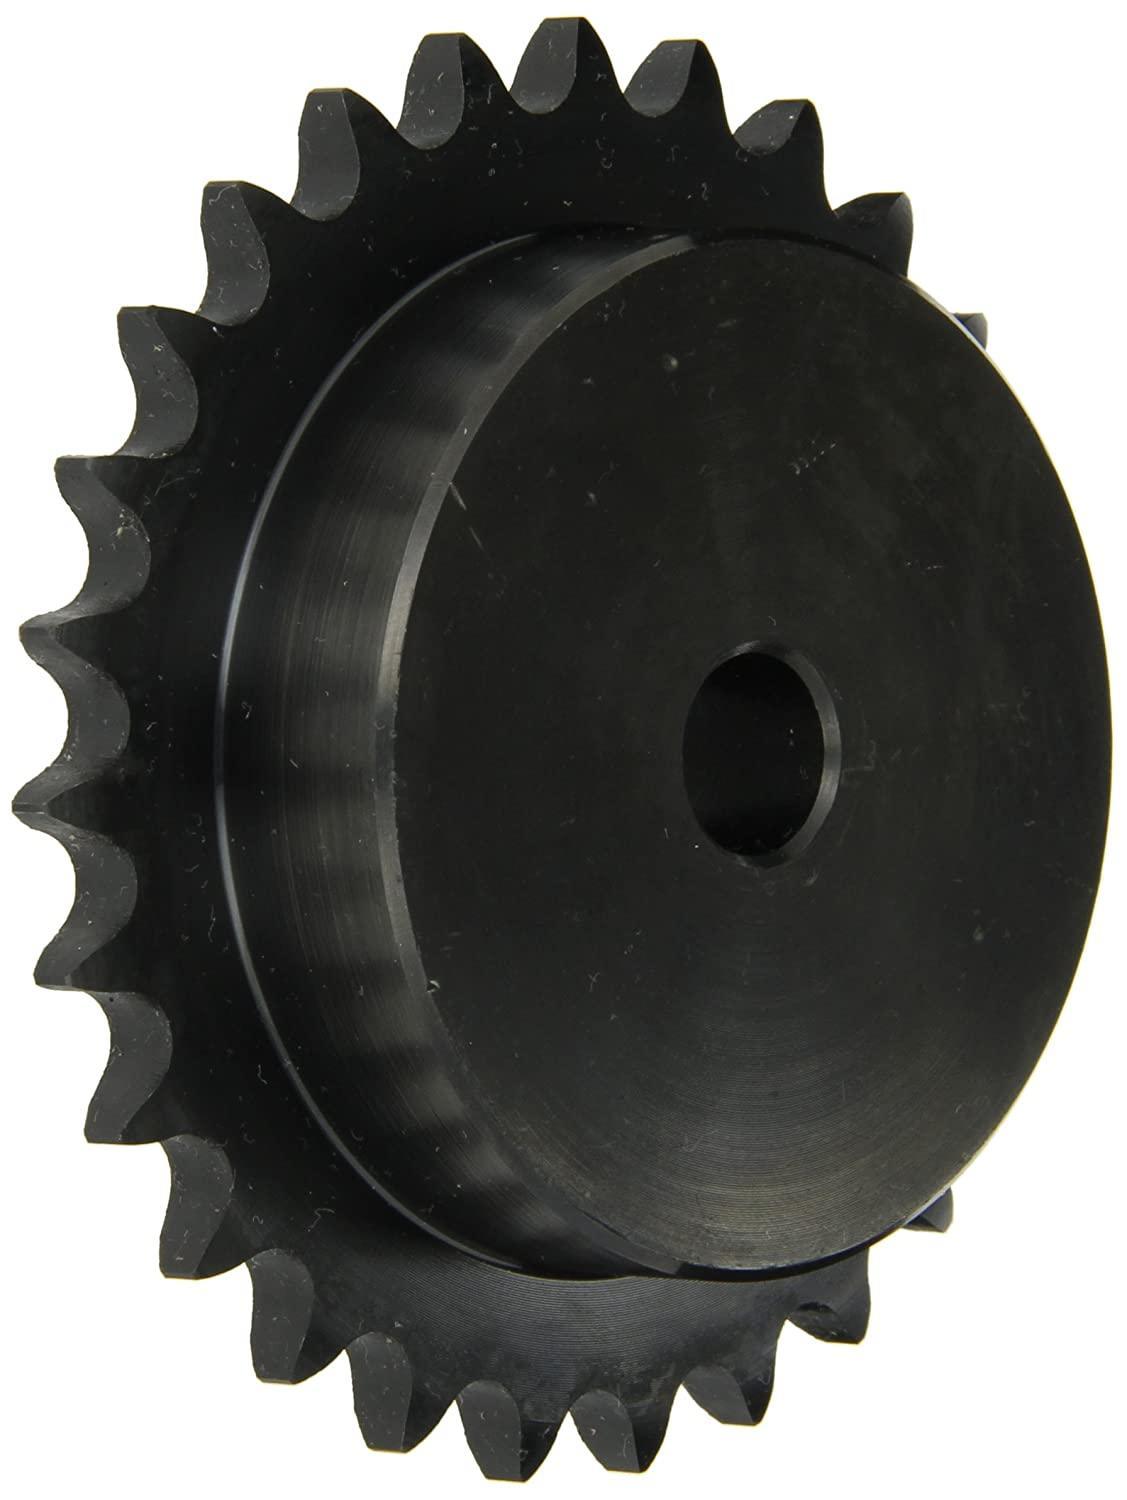 35B48 Roller Chain Sprocket With Stock Bore - Forces Inc